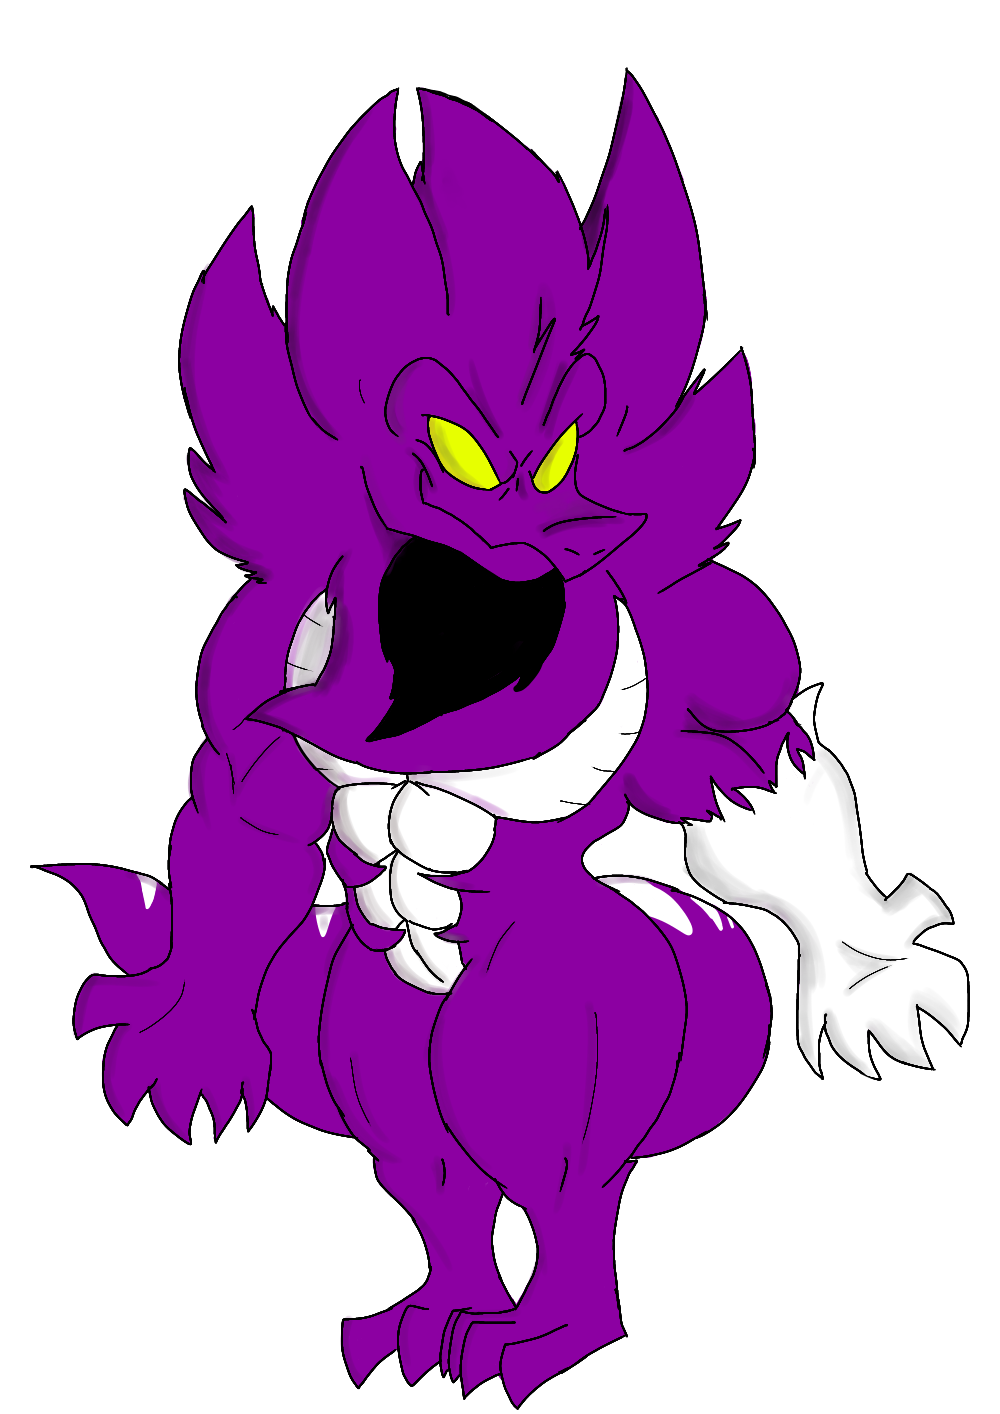 Void, the True Shadow Monster King